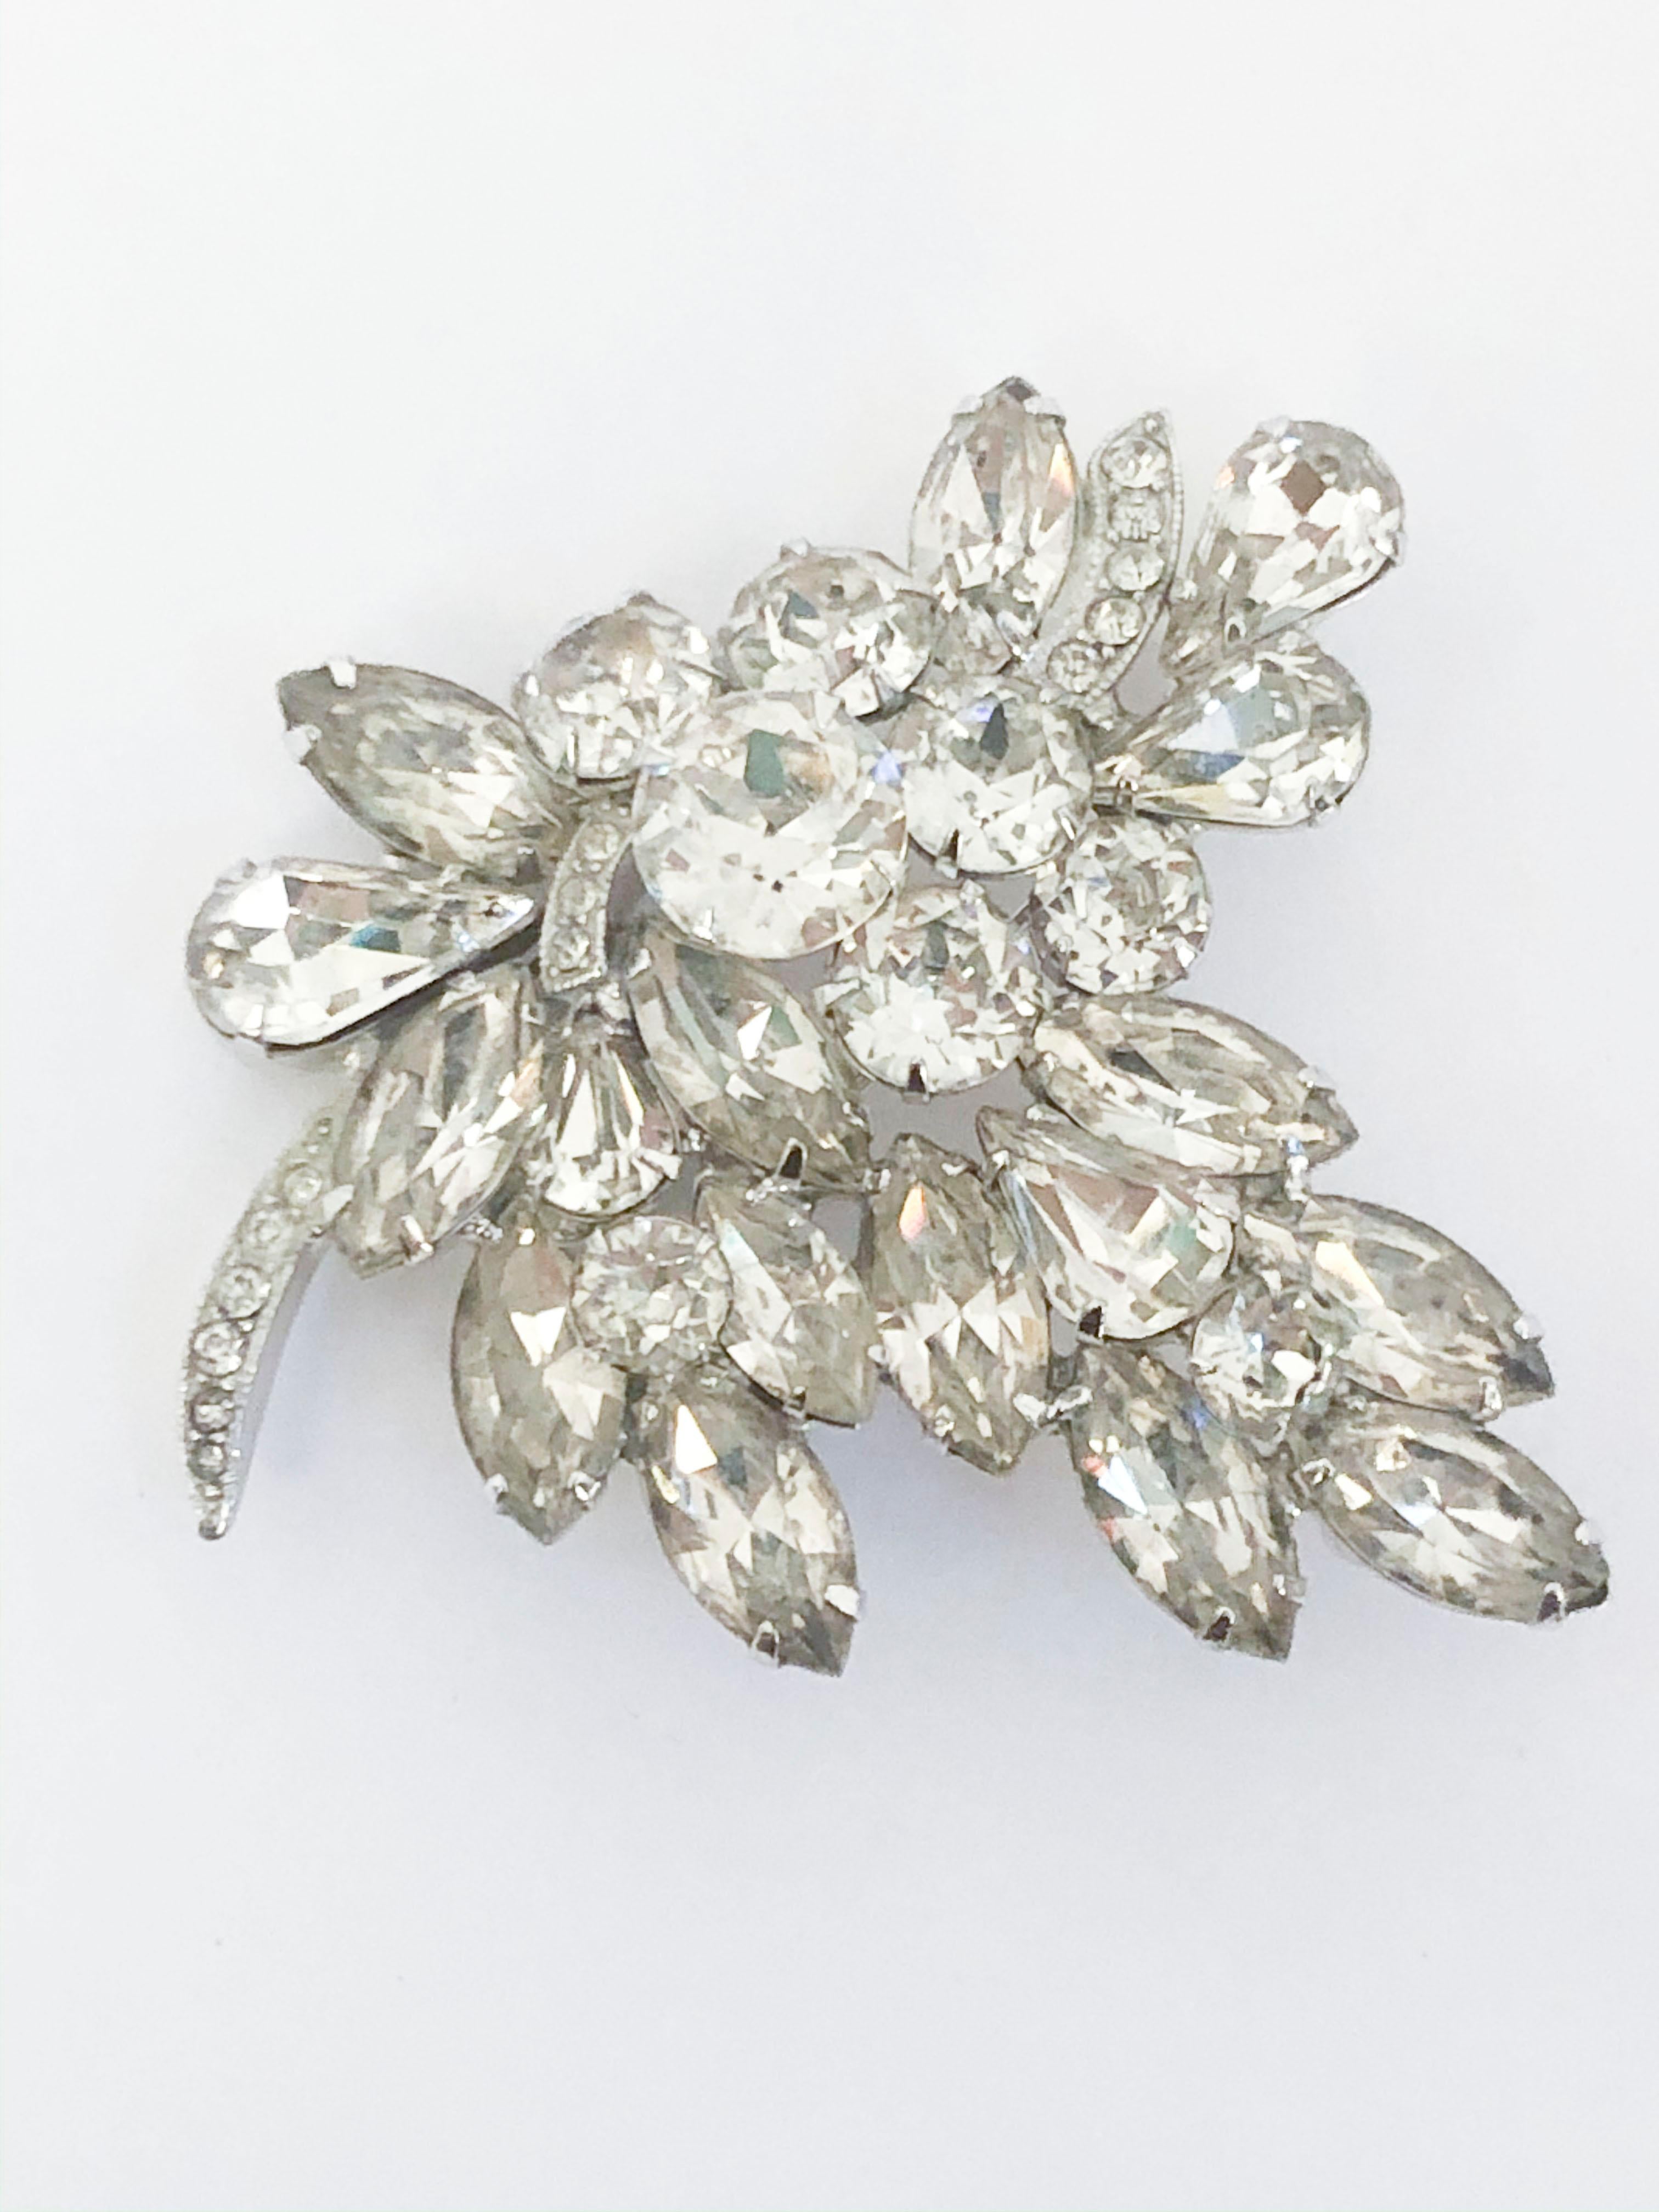 1950s Eisenberg brooch featuring enlarged clear rhinestones with varying cuts. The setting metal has a brilliant silver wash and the back has a standard brooch pin and is hallmarked with 